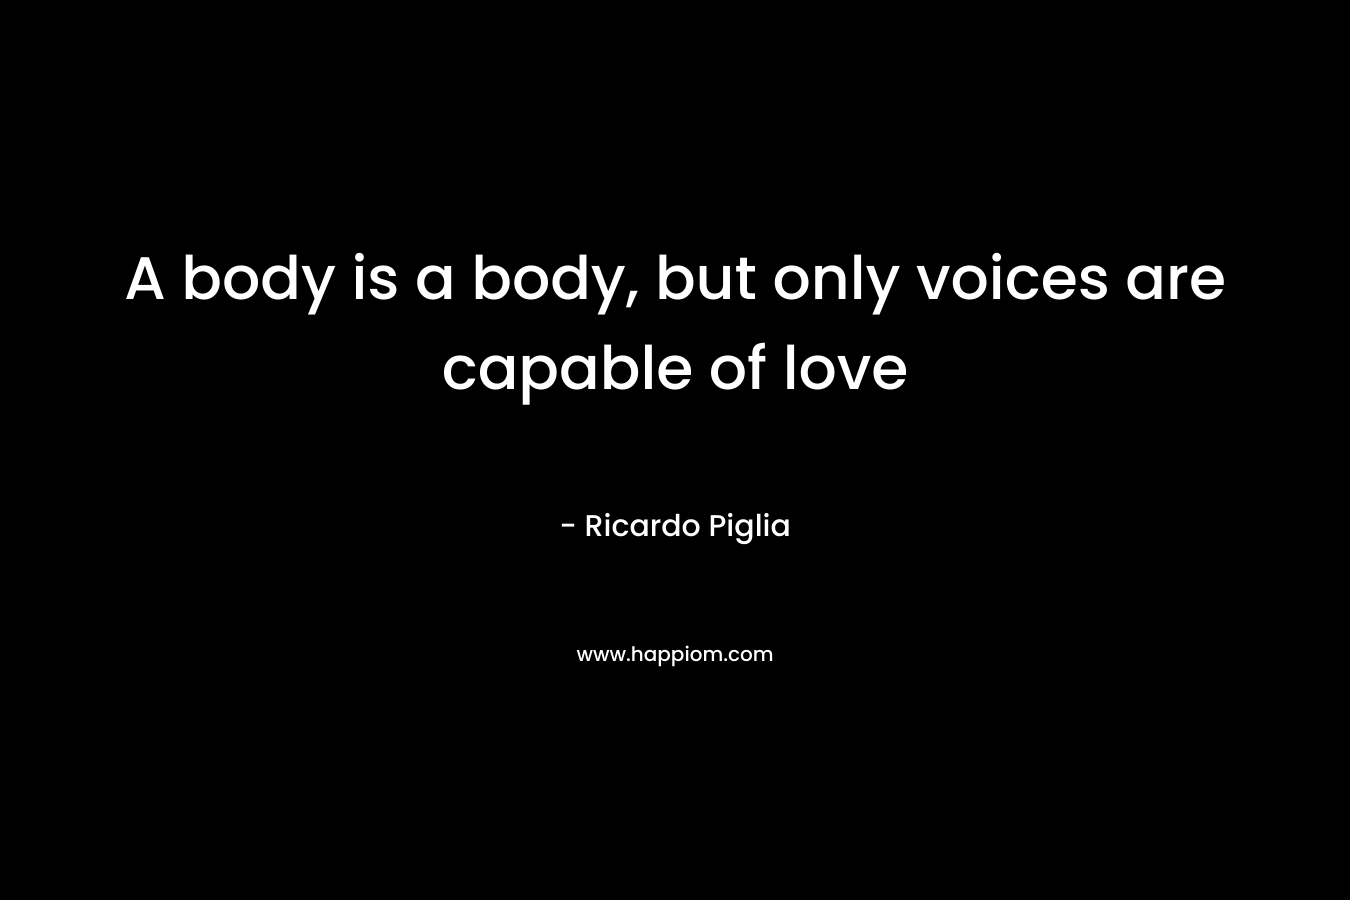 A body is a body, but only voices are capable of love